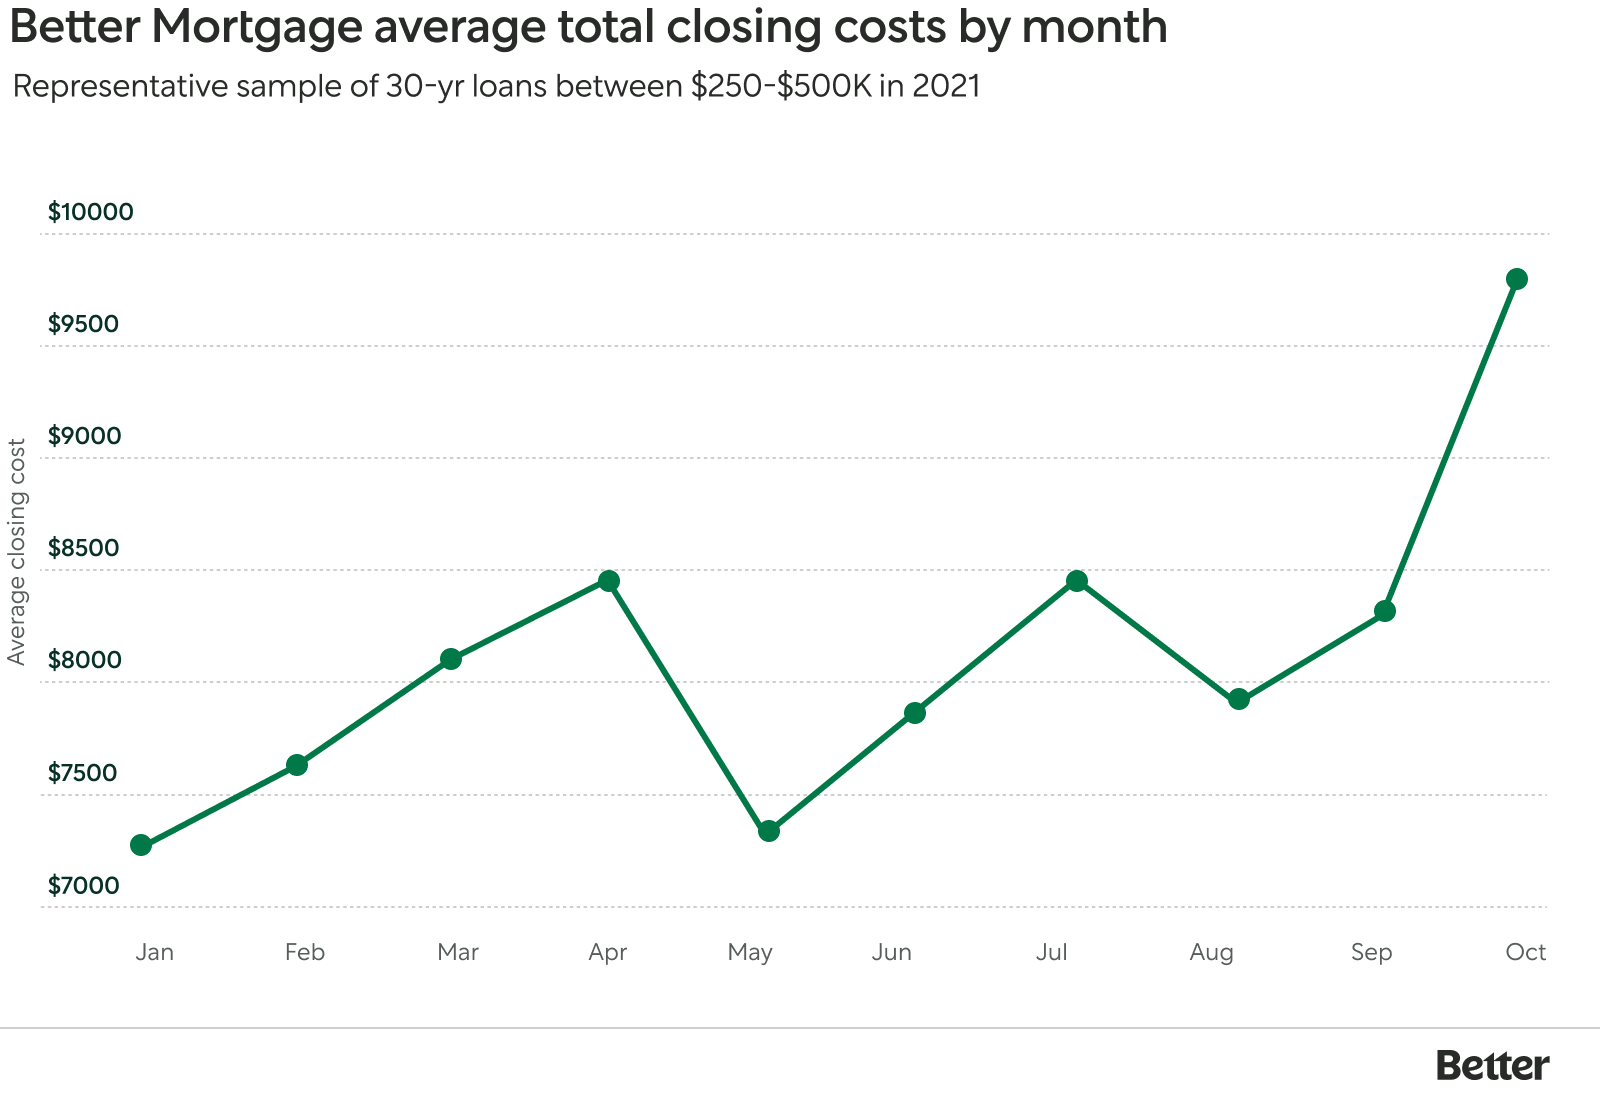 Line Graph: Better Mortgage Average Total Closing Costs By Month From January 2021 to October 2021